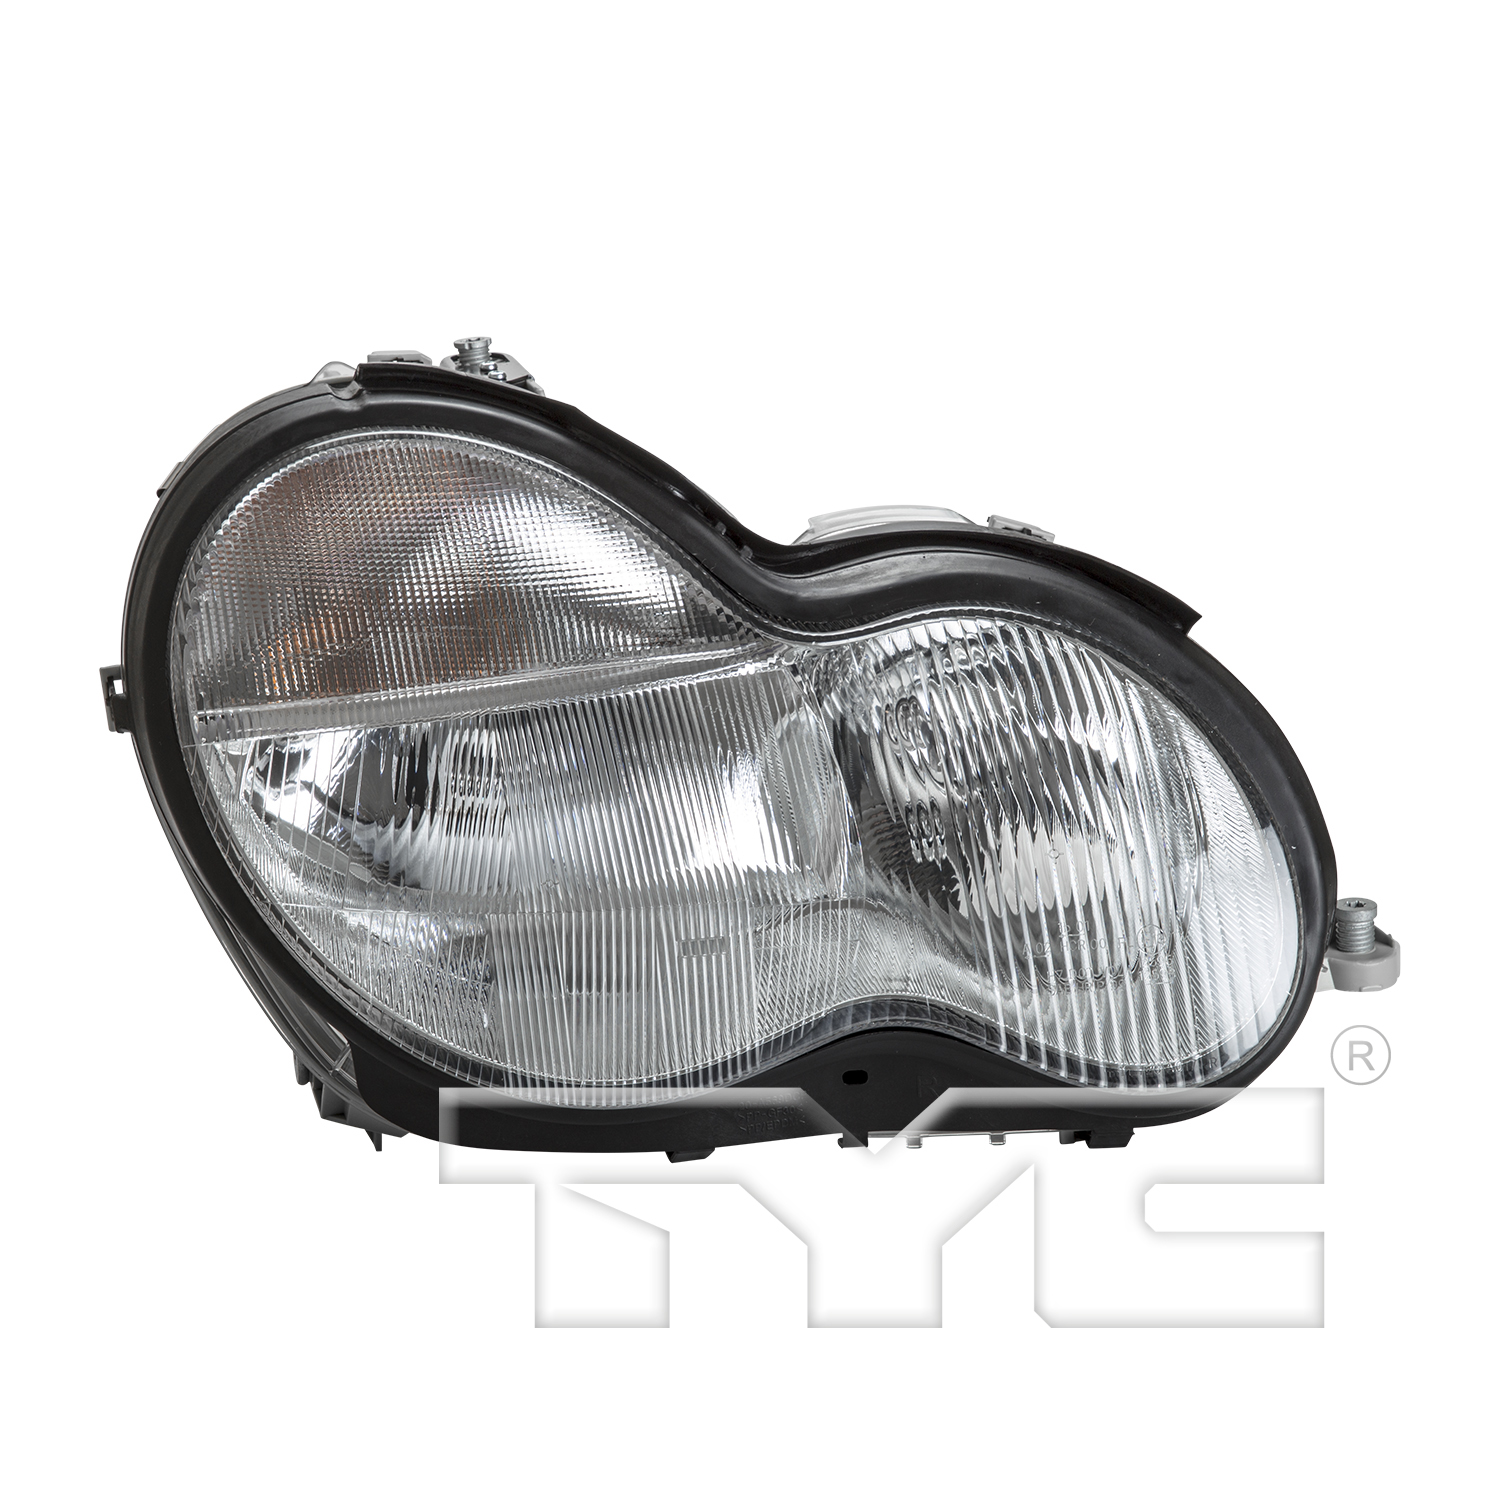 Aftermarket HEADLIGHTS for MERCEDES-BENZ - C32 AMG, C32 AMG,02-04,RT Headlamp assy composite